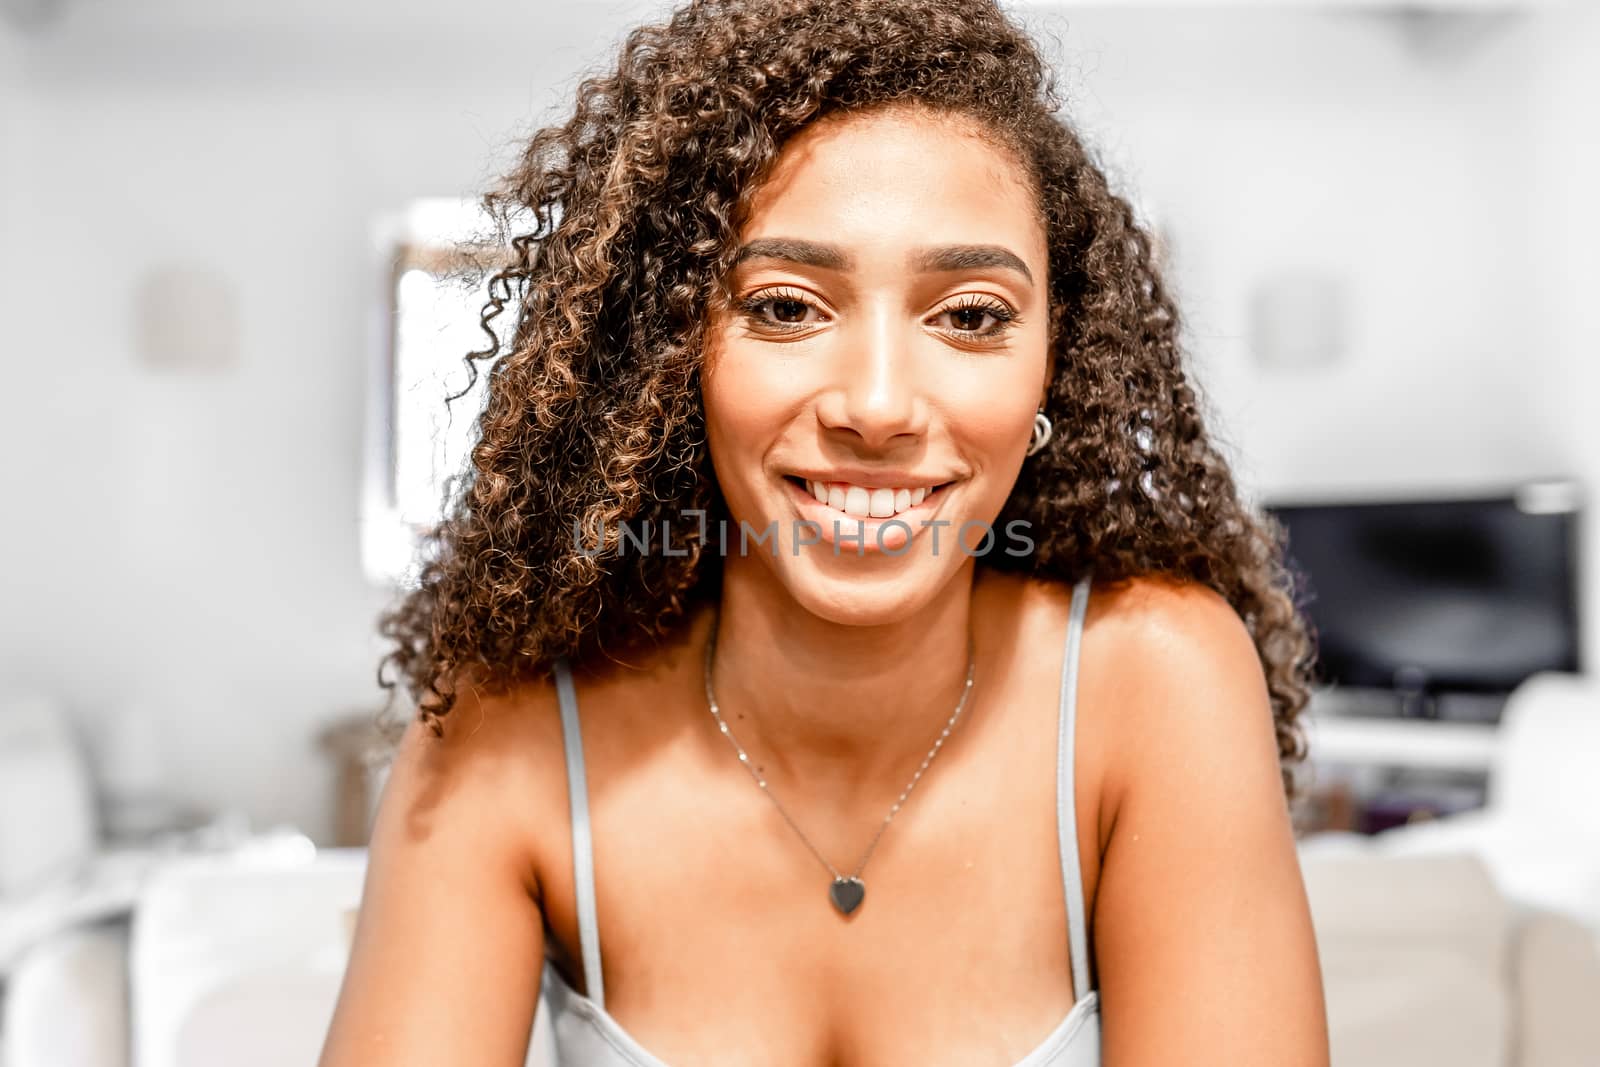 Close-up of young hispanic cute curly woman smiling looking at the camera like as in video conference in a white home living room ambient - Female confident millennial latina portrait in singlet vest by robbyfontanesi